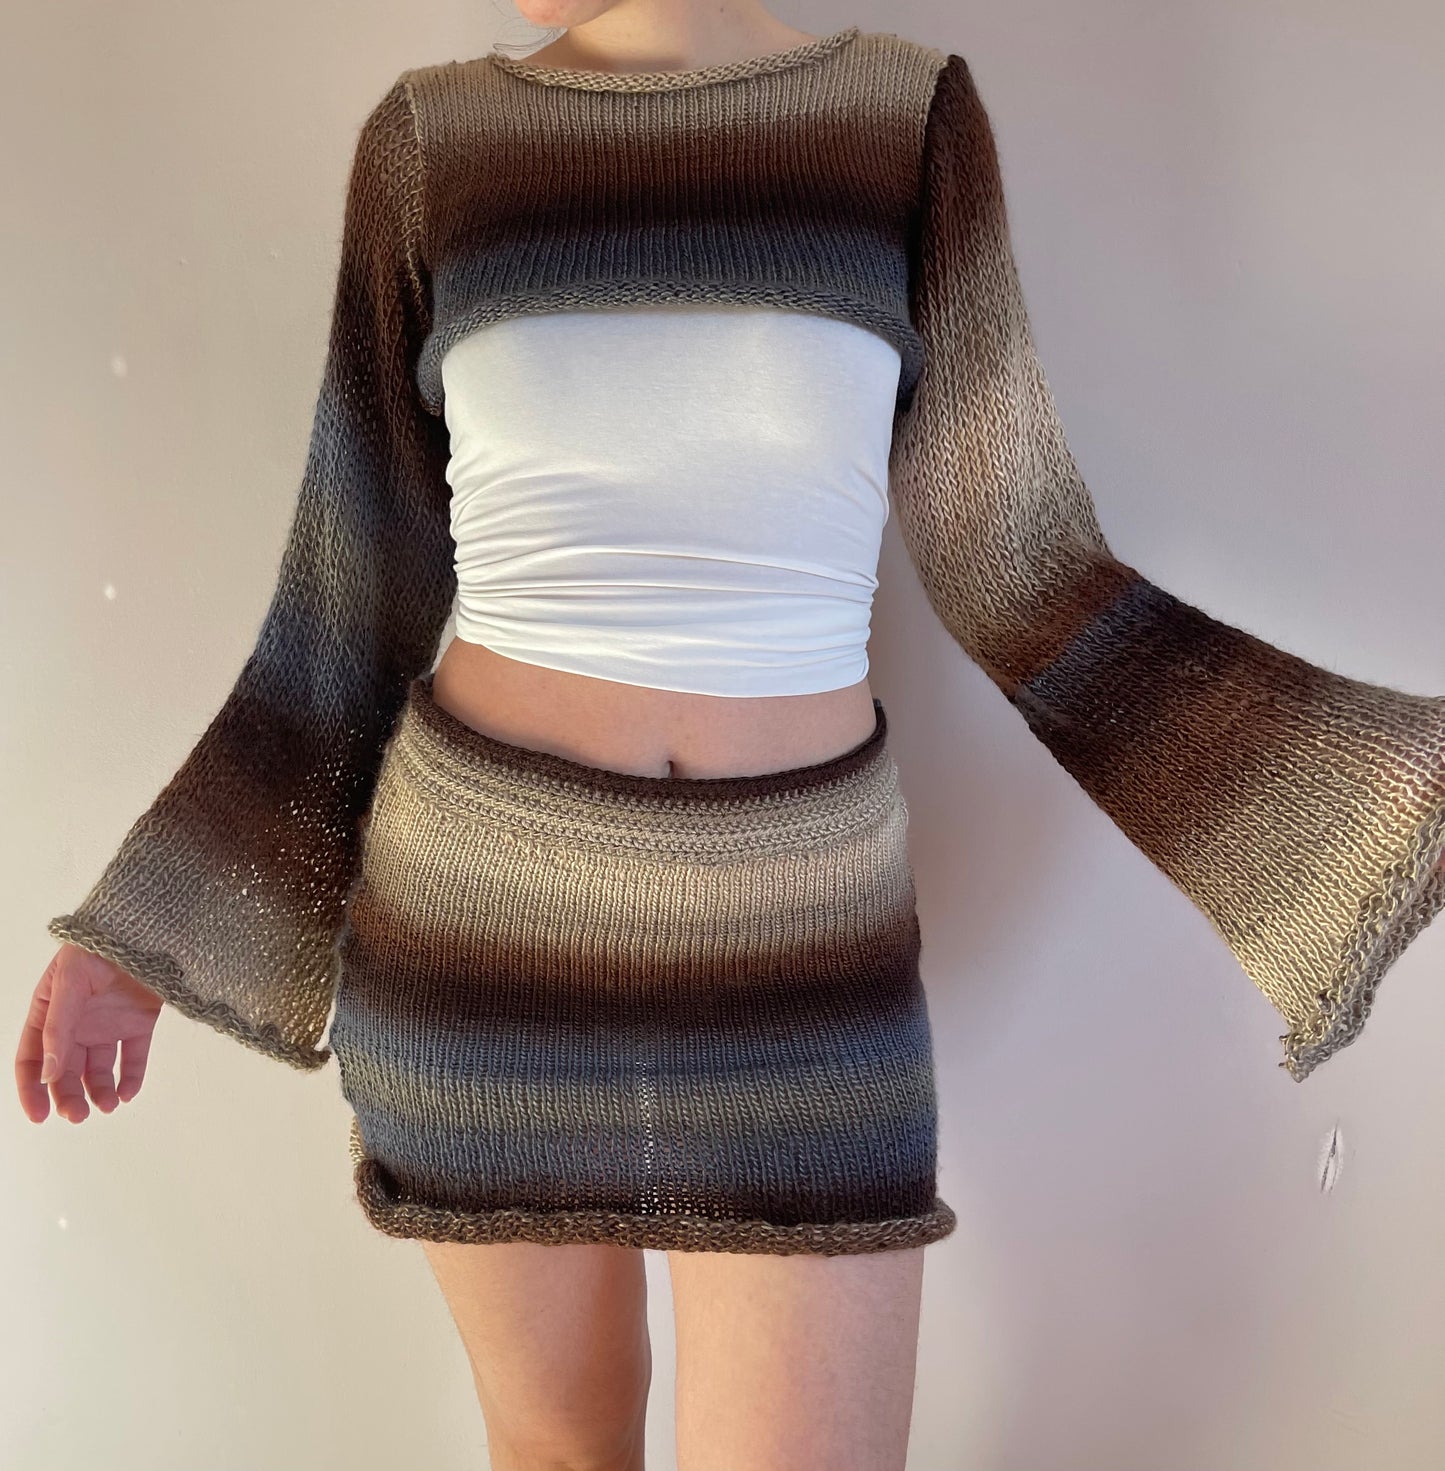 SET: Handmade knitted ombré skirt and top coord - Seashell colourway